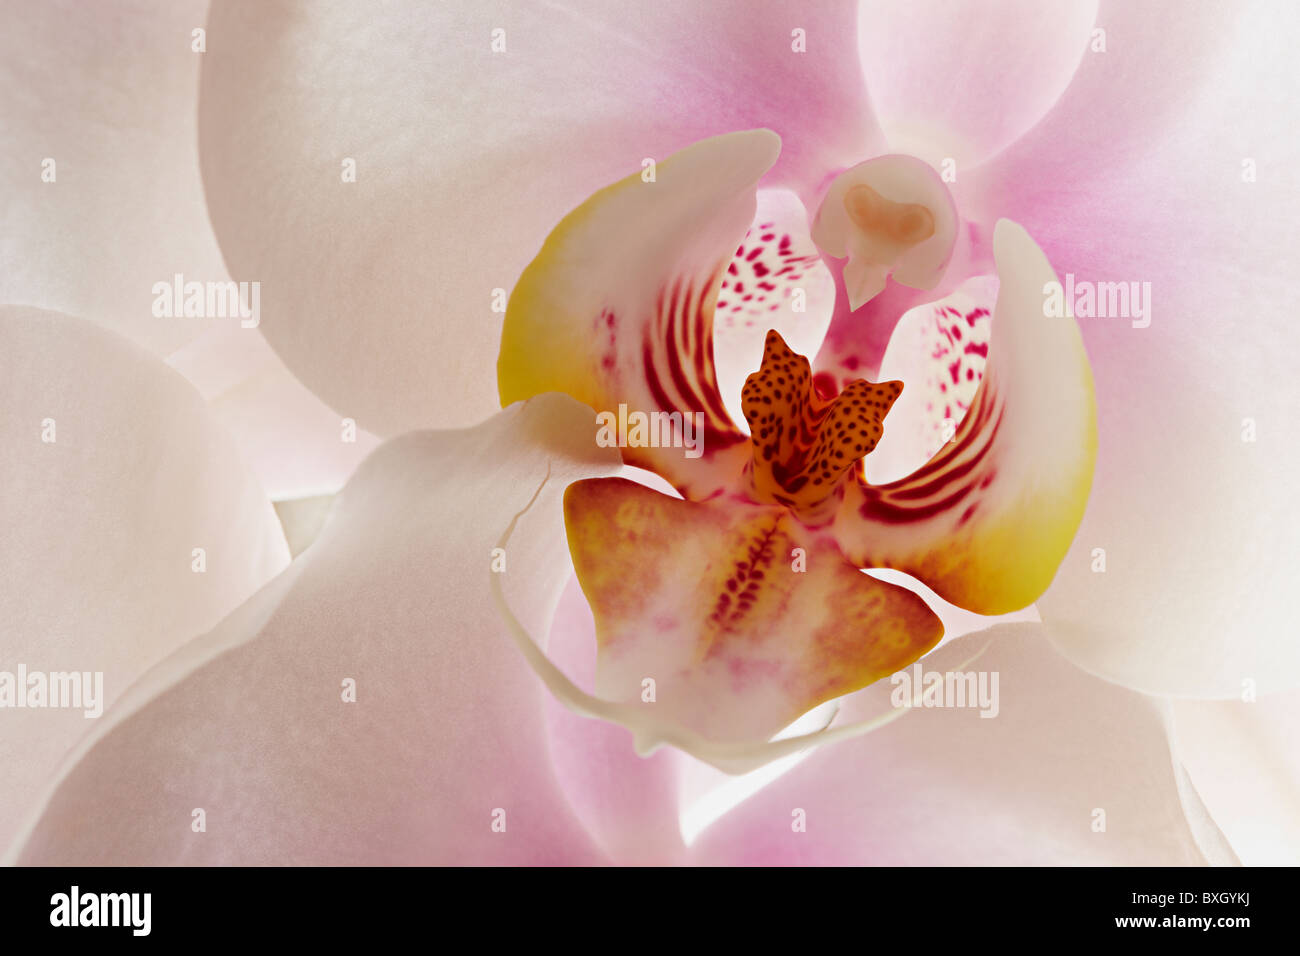 Close up White Phalaenopsis Orchid Foto Stock